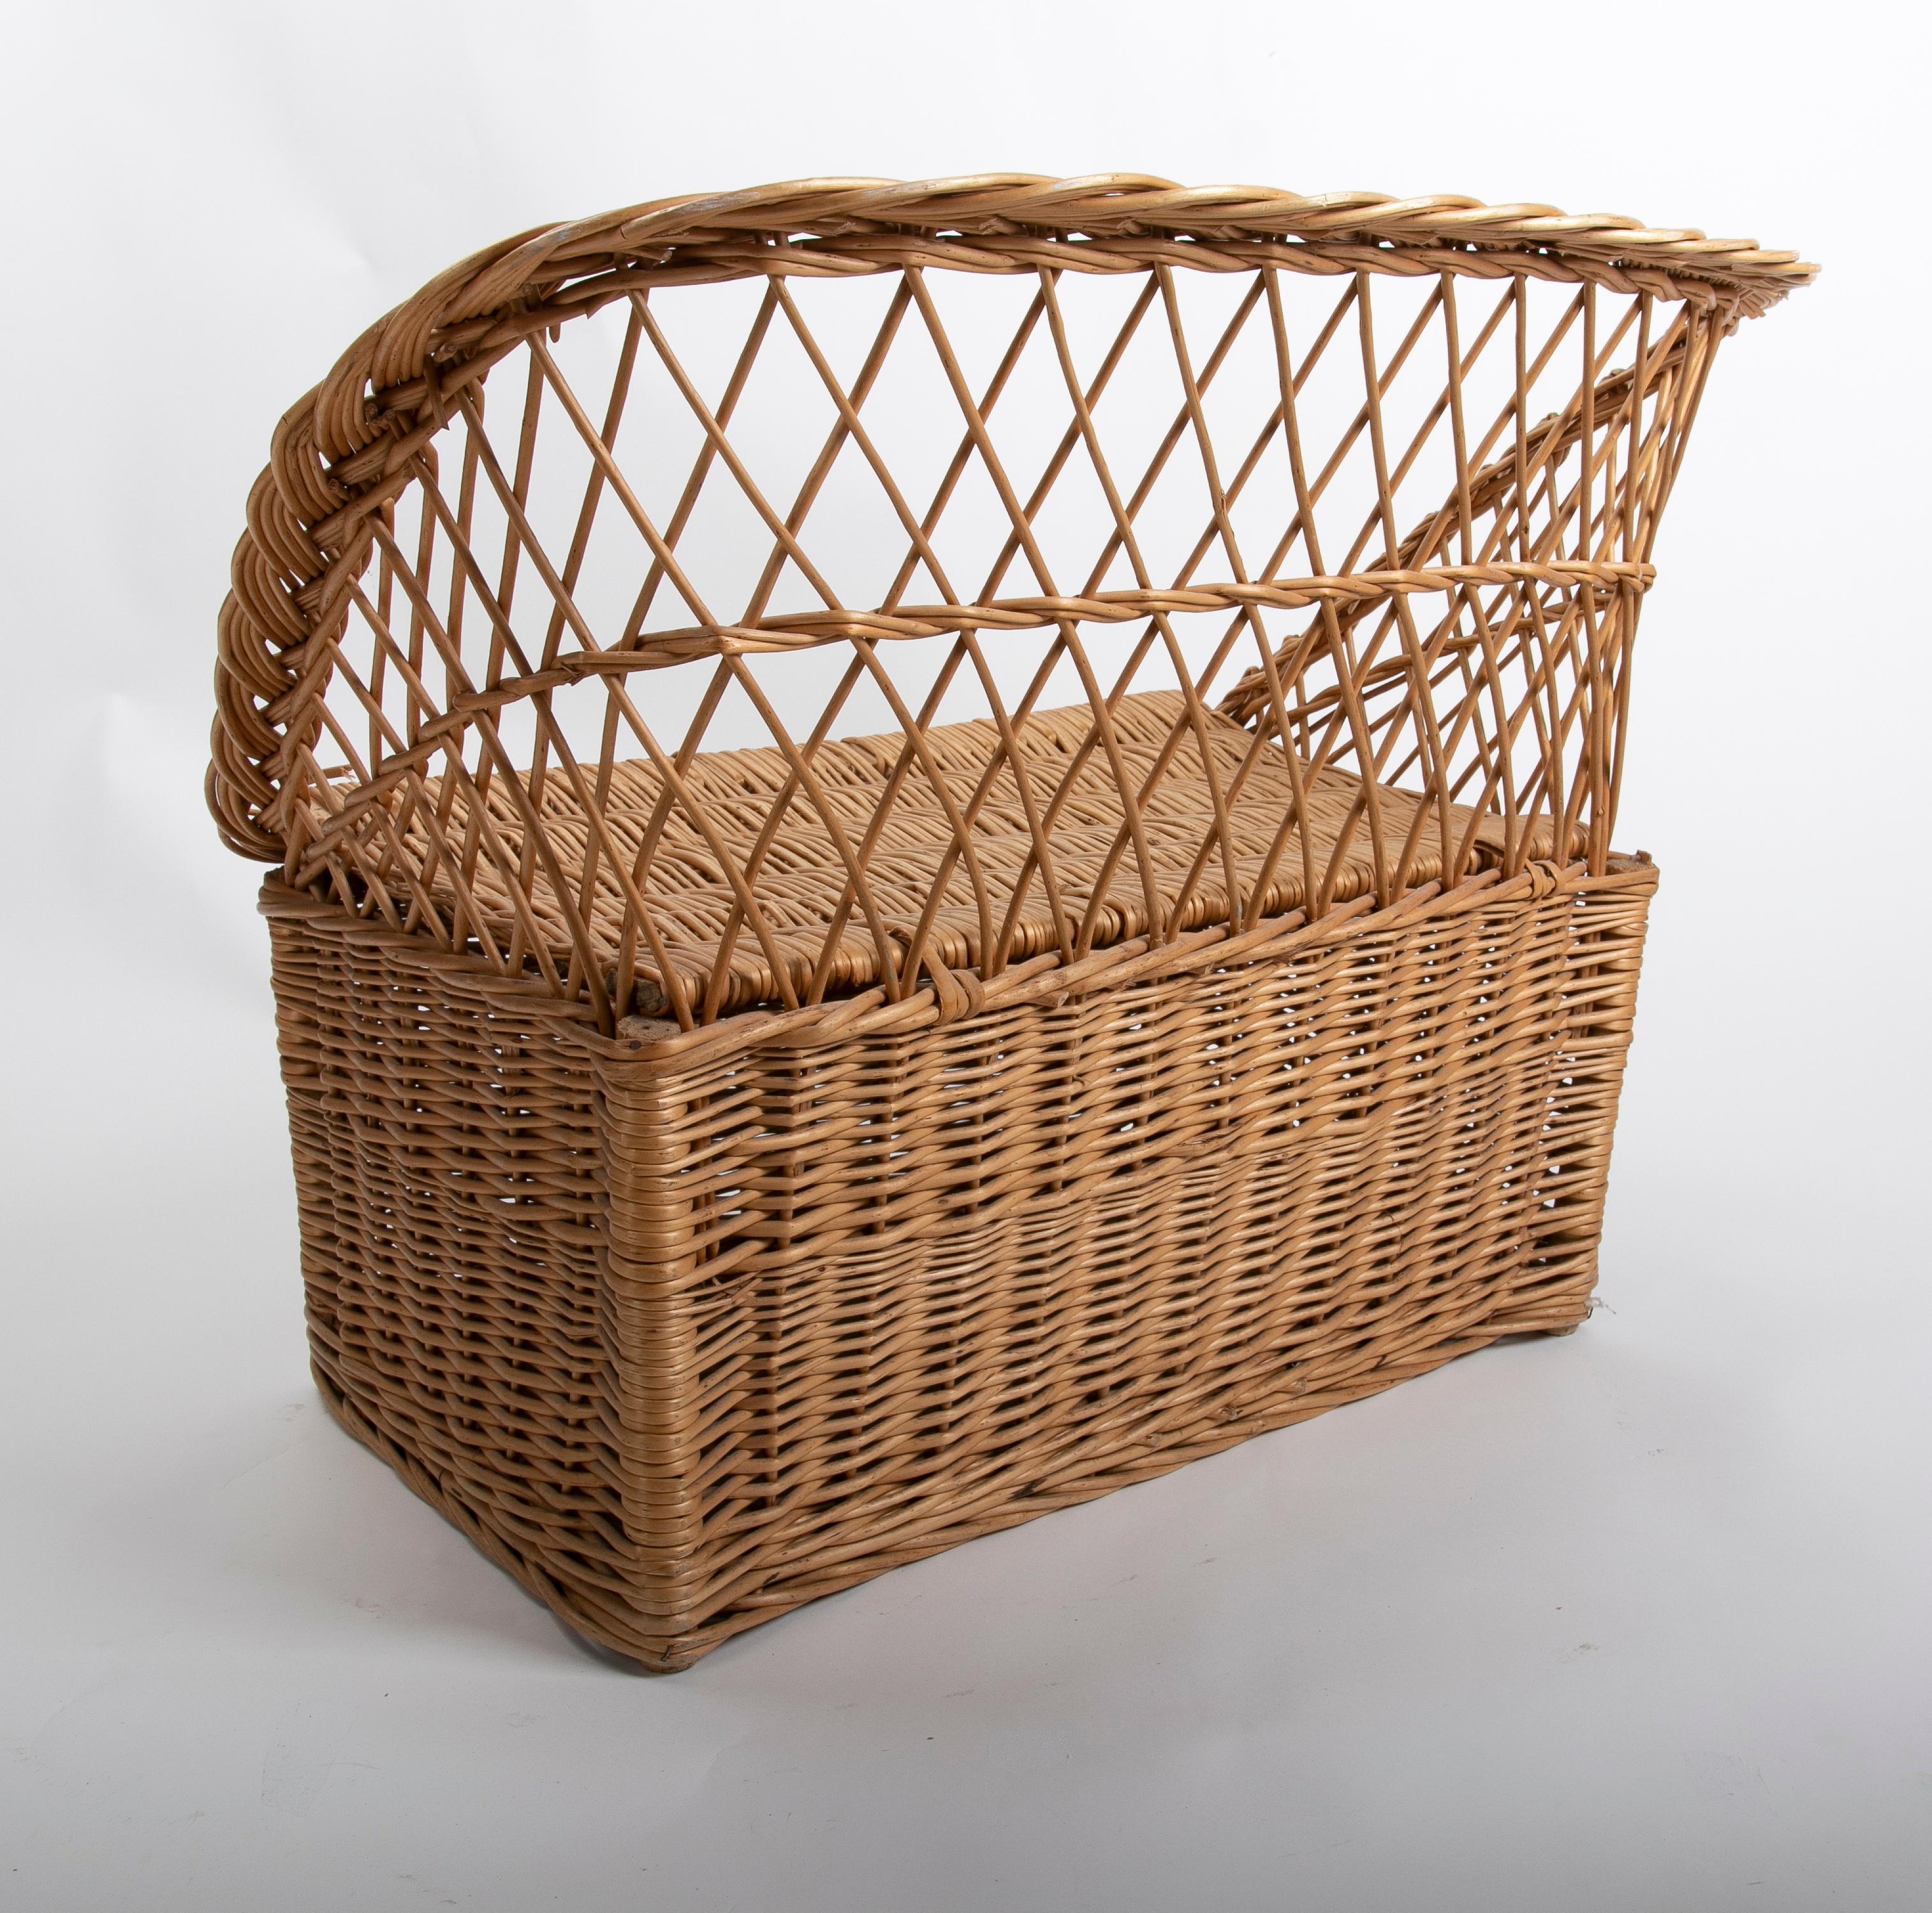 20th Century 1980s Wicker Sofa for Children with Folding Seat  For Sale